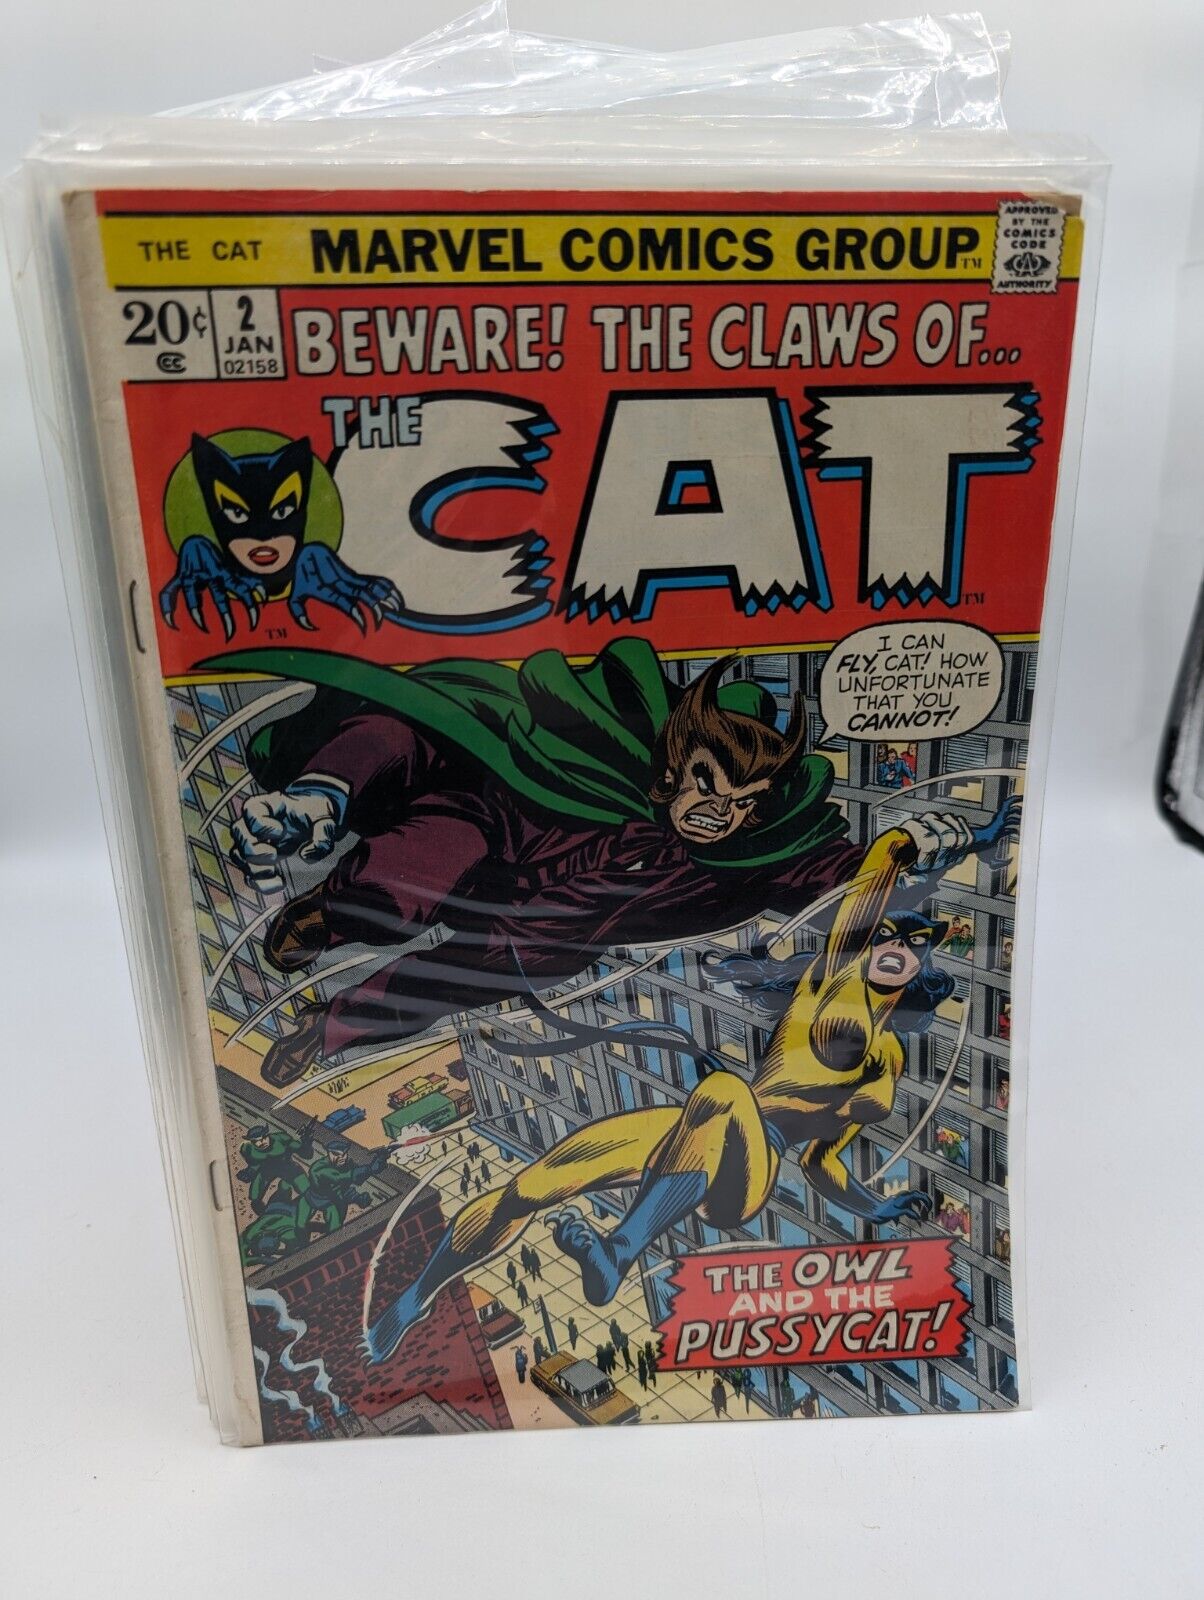 BEWARE THE CLAWS OF THE CAT #2 Marvel OWL Greer Nelson 1973